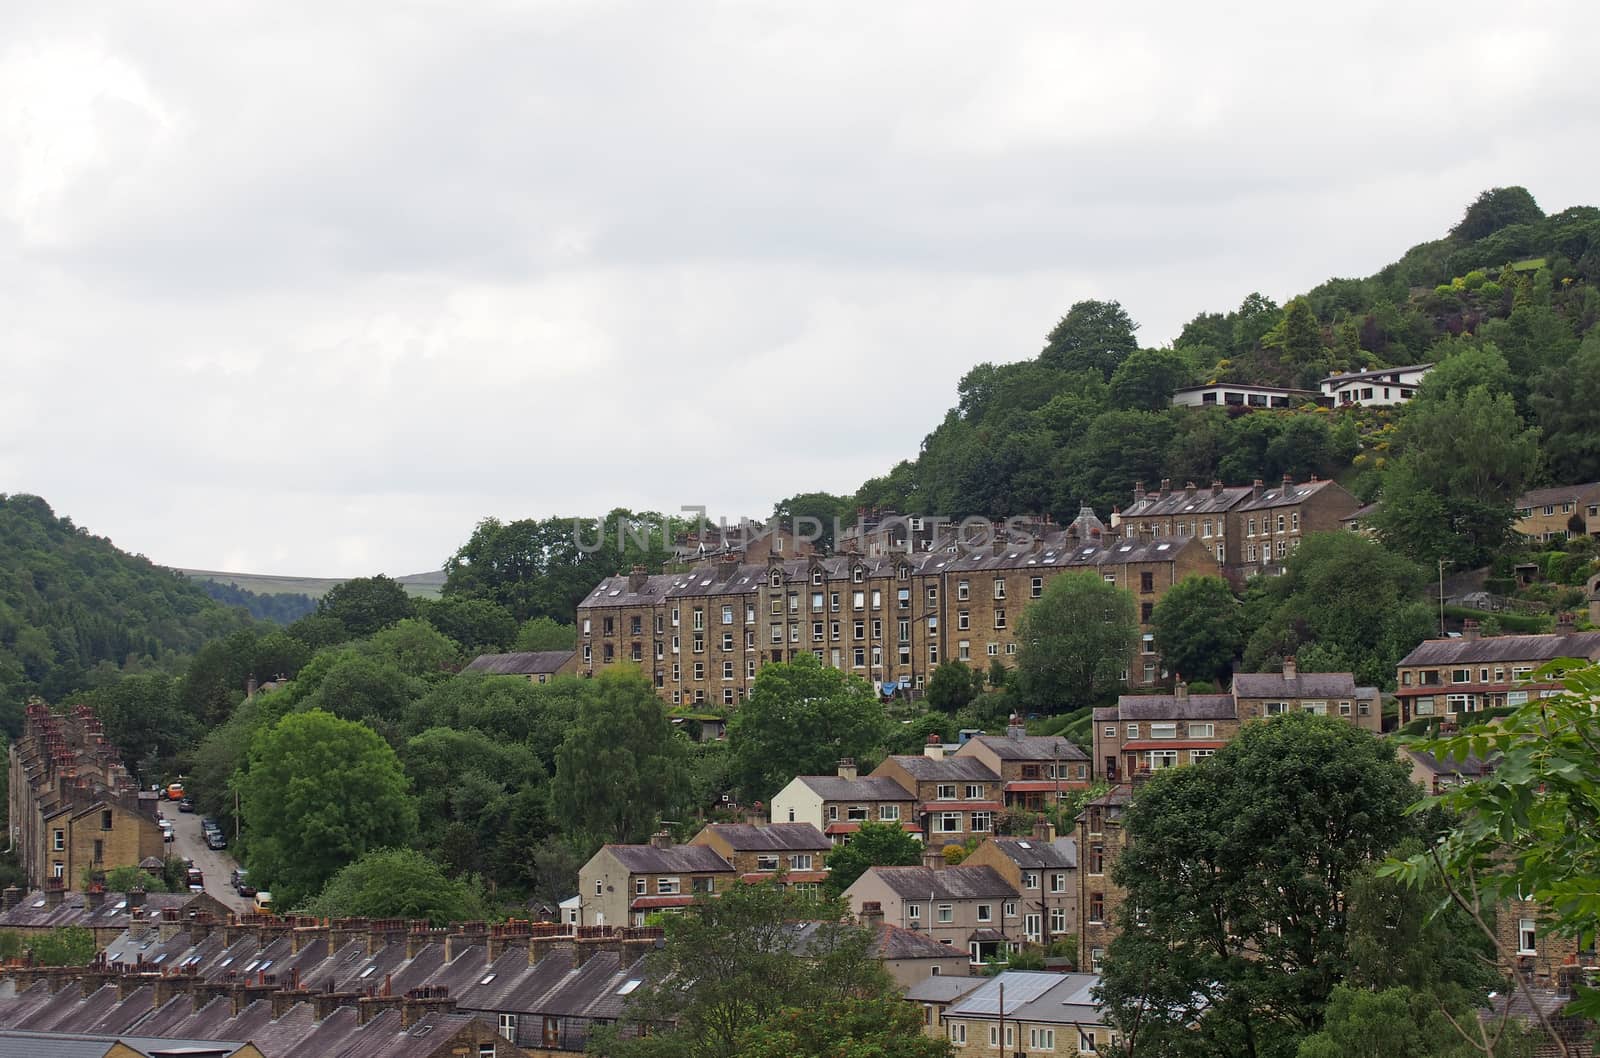 a view of the streets and houses of hebden bridge between trees and calder valley landscape in west yorkshire